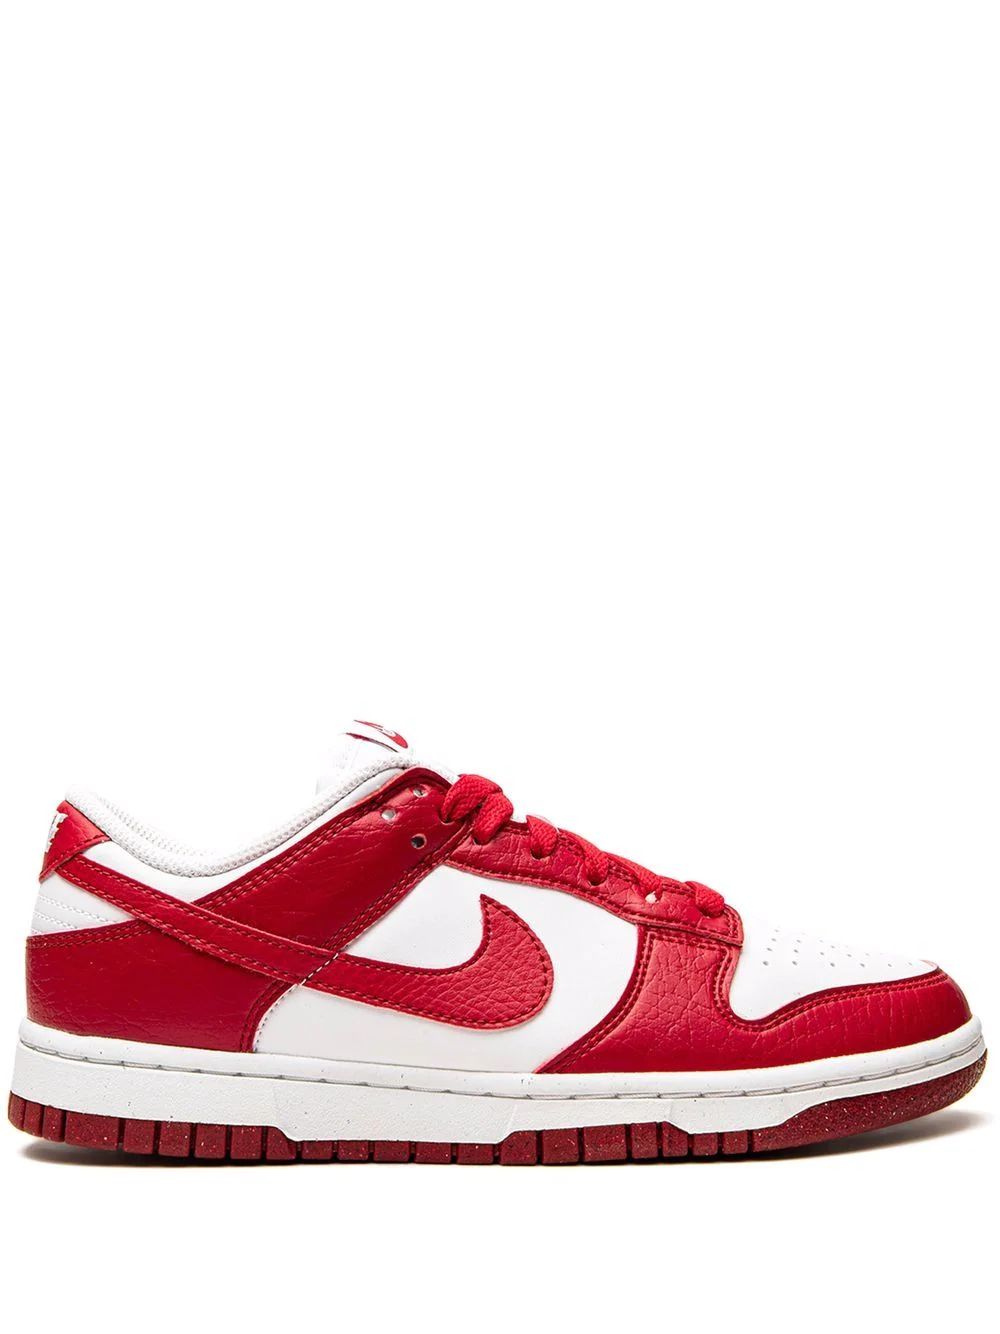 Dunk Low Next Nature "University Red" sneakers | Farfetch Global